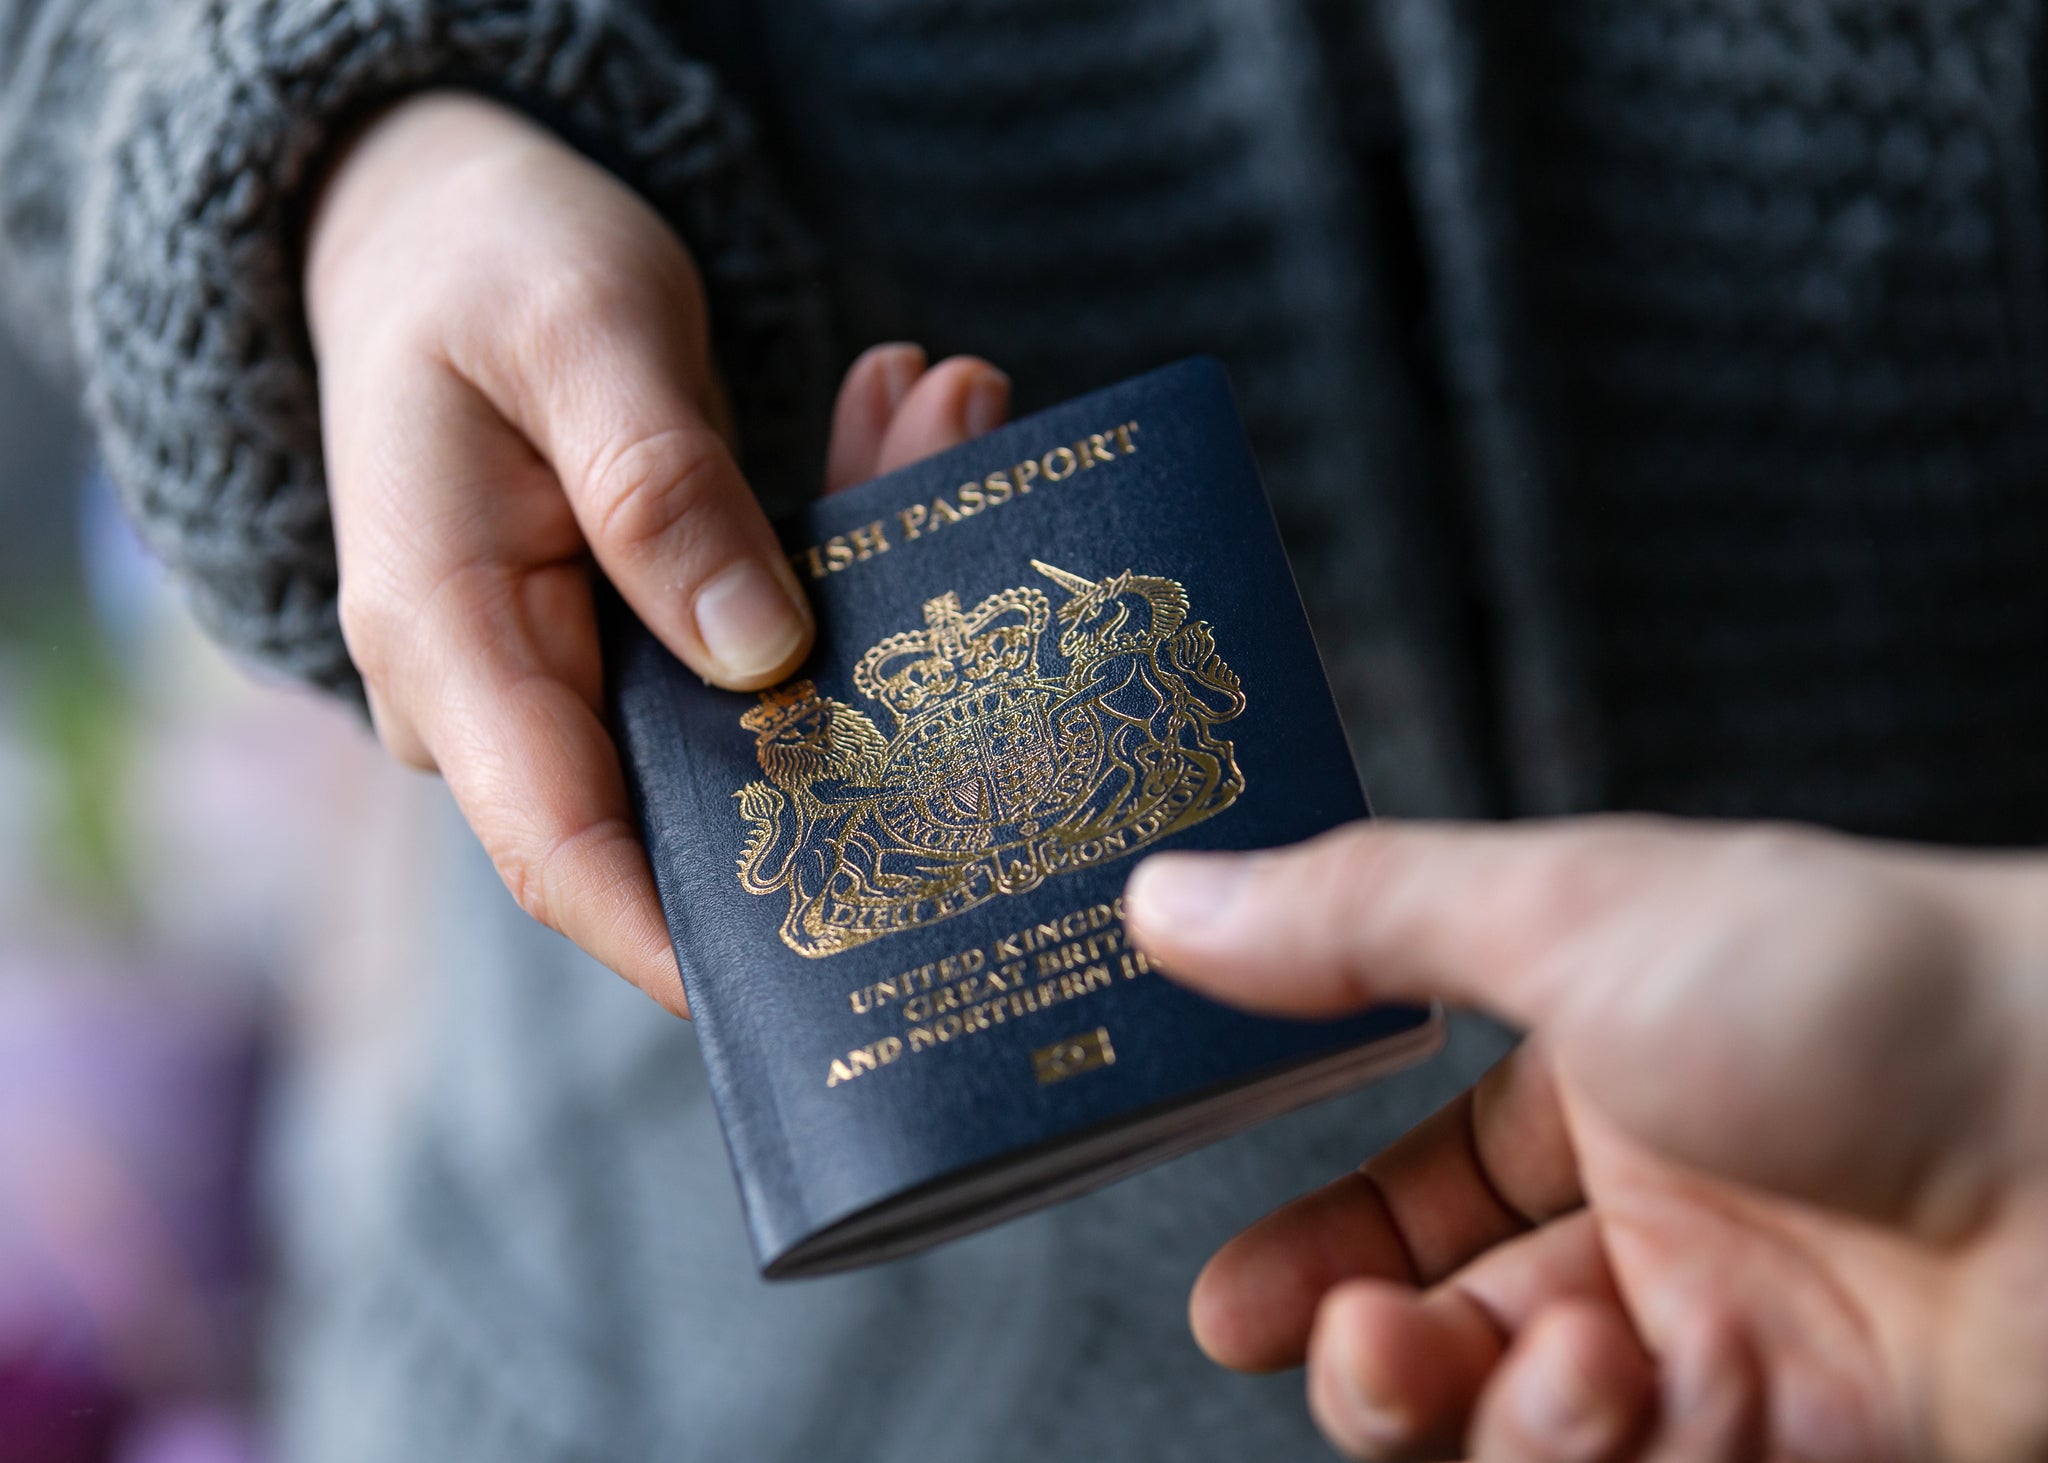 Long gone are the days when you could travel to the EU at any point before your travel document expired